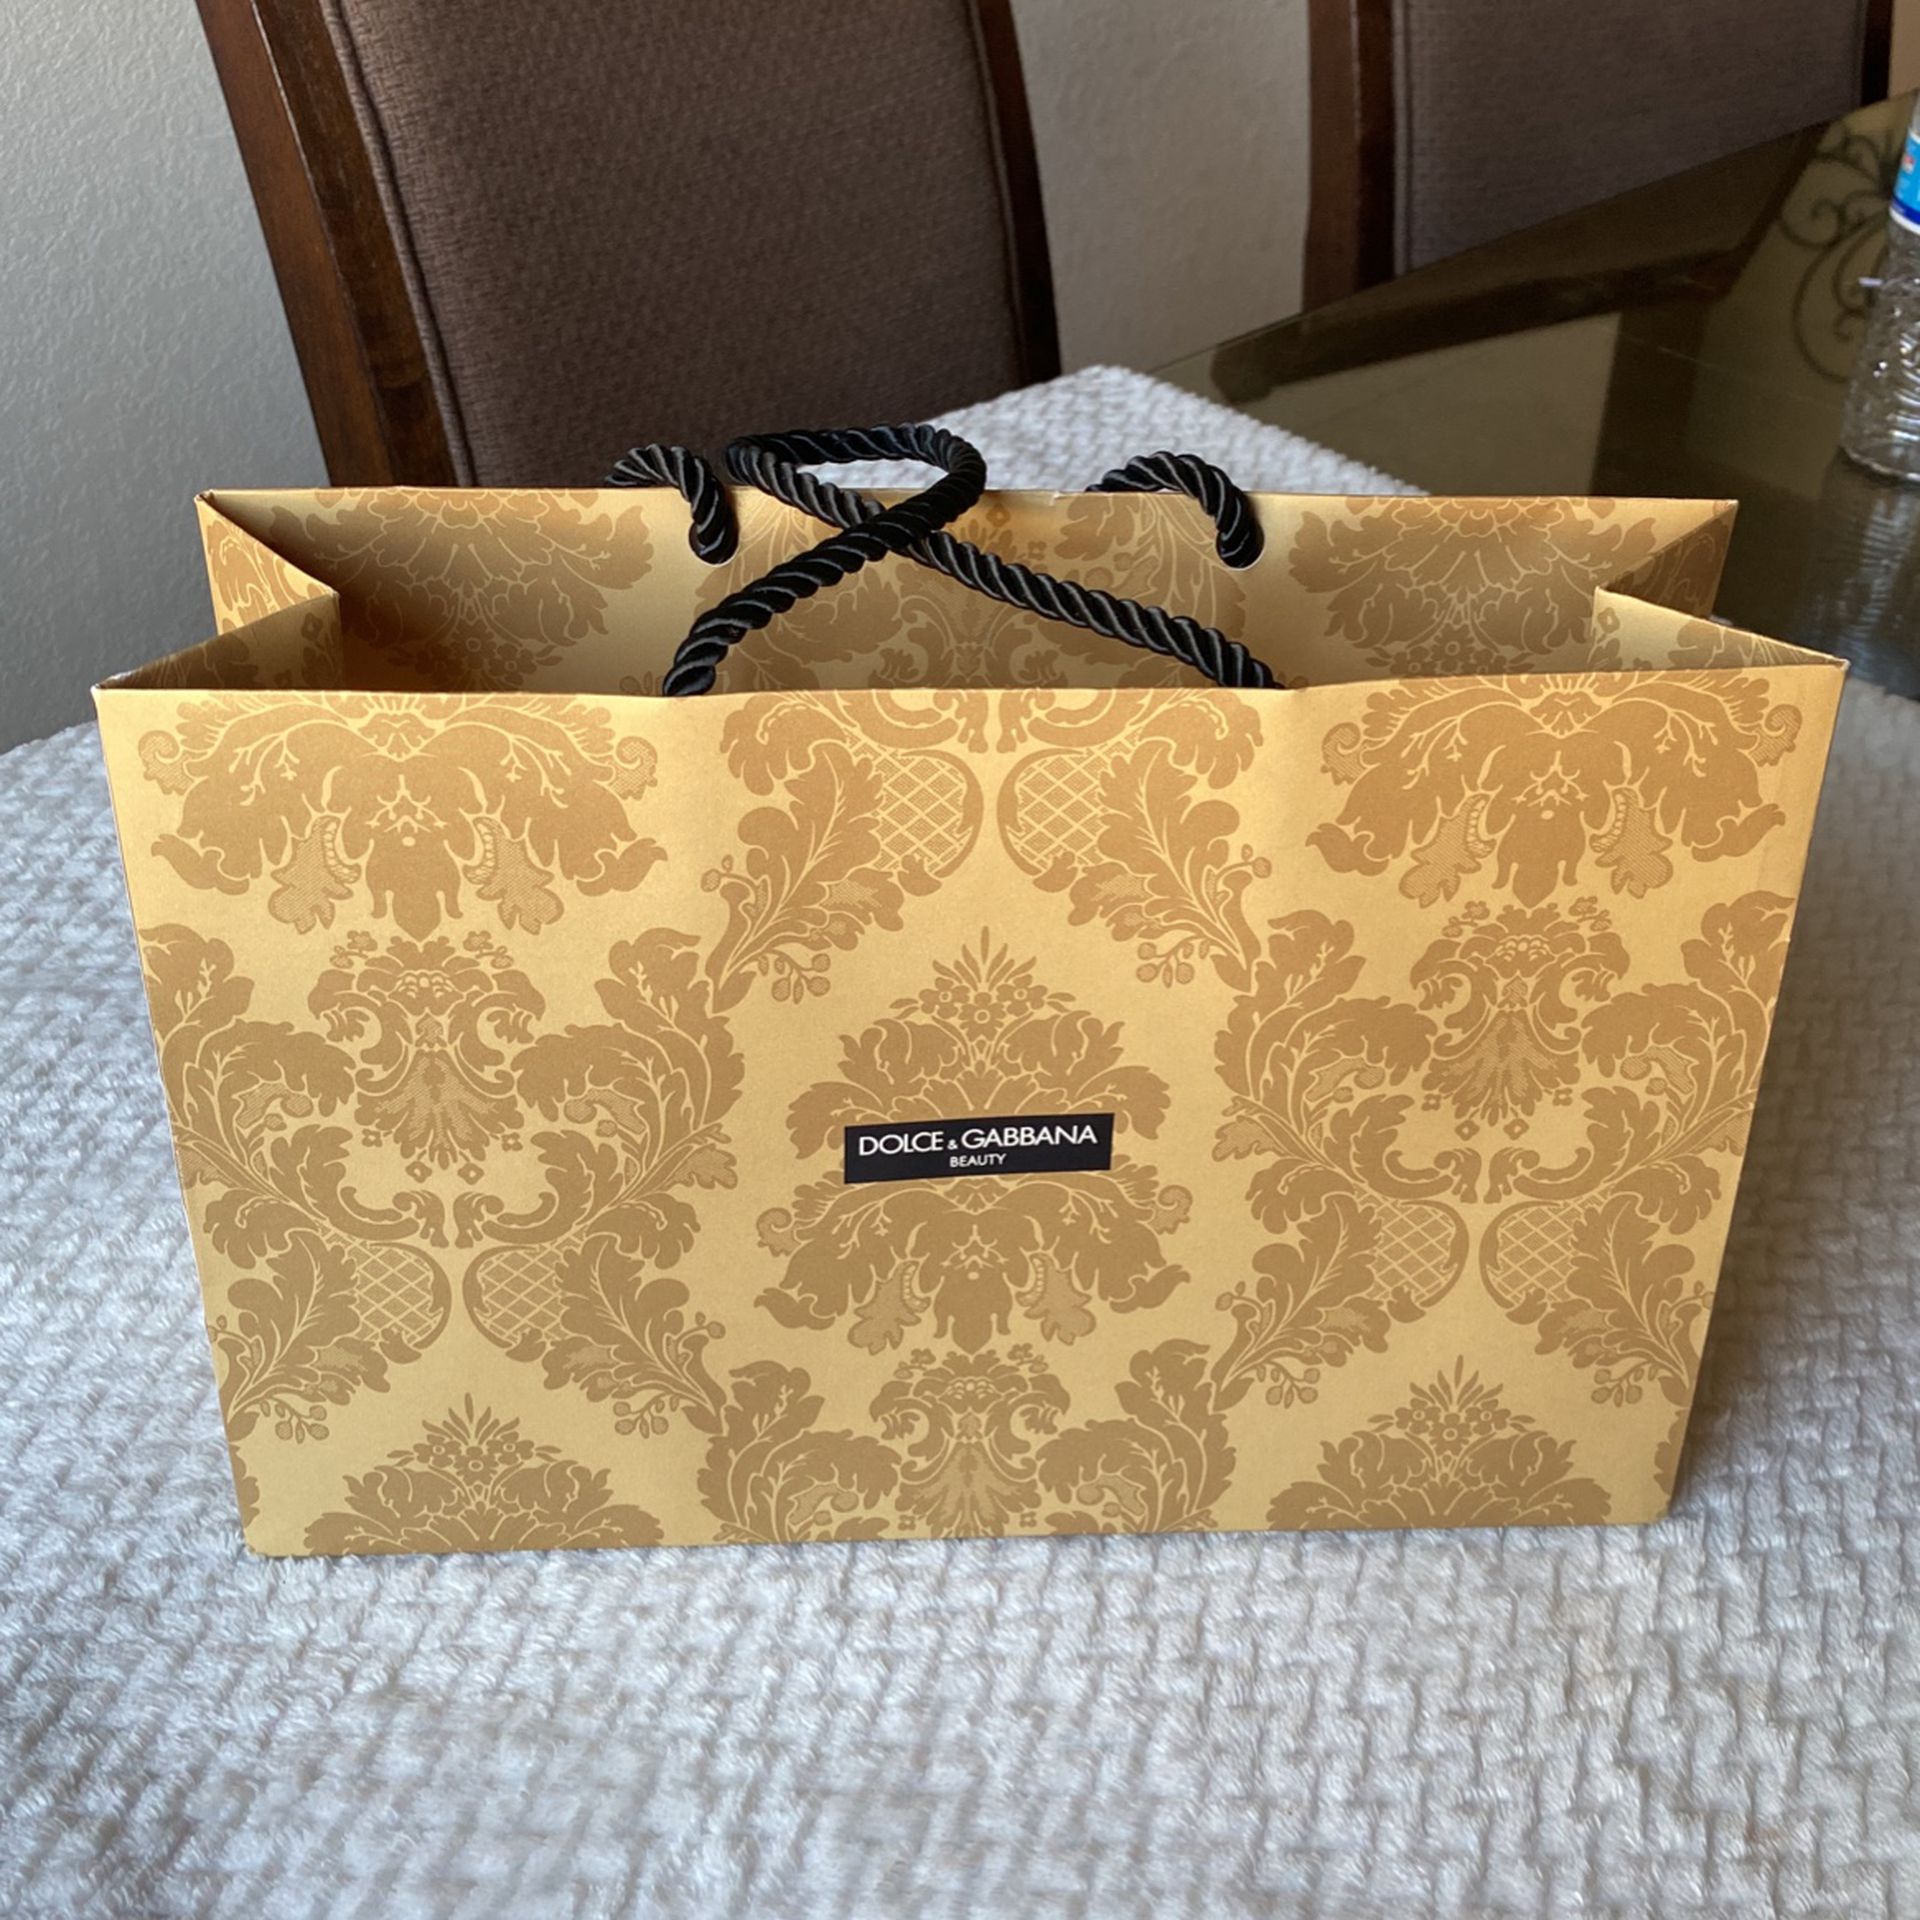 Dolce & Gabbana Paper Bag for Sale in Arrowhed Farm, CA - OfferUp